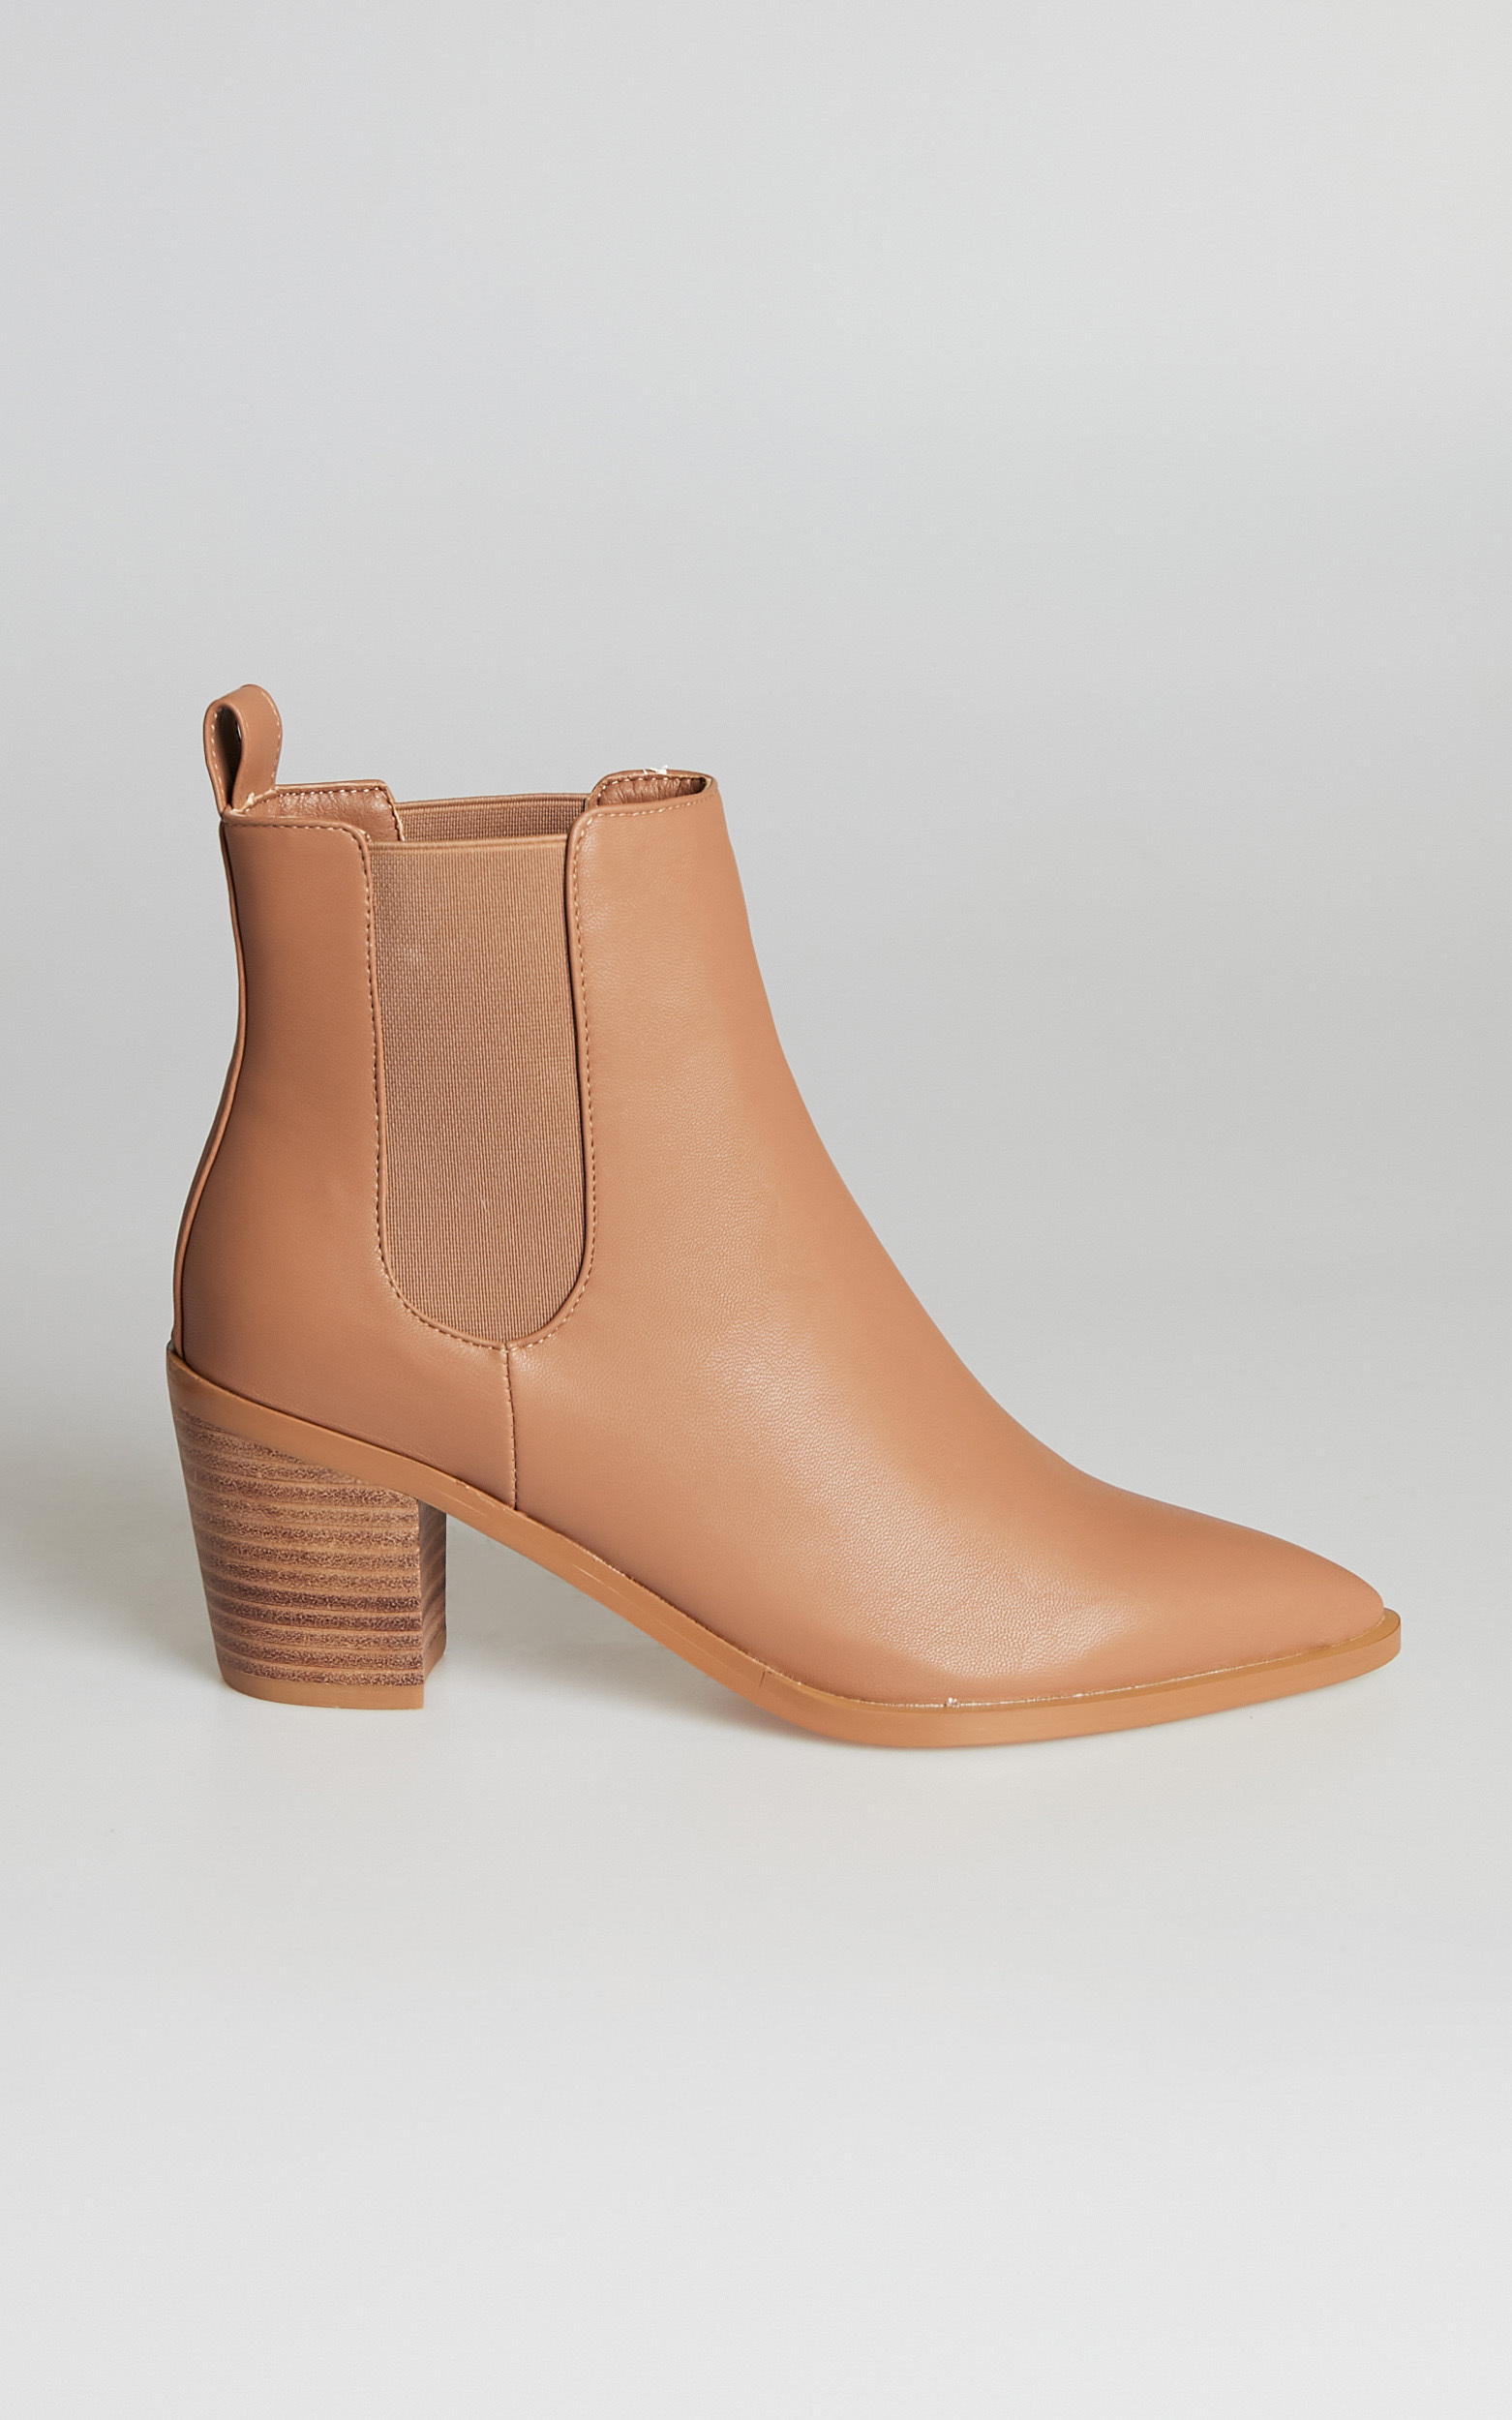 Billini - Jazelle Boots in Maple - 06, BRN1, hi-res image number null